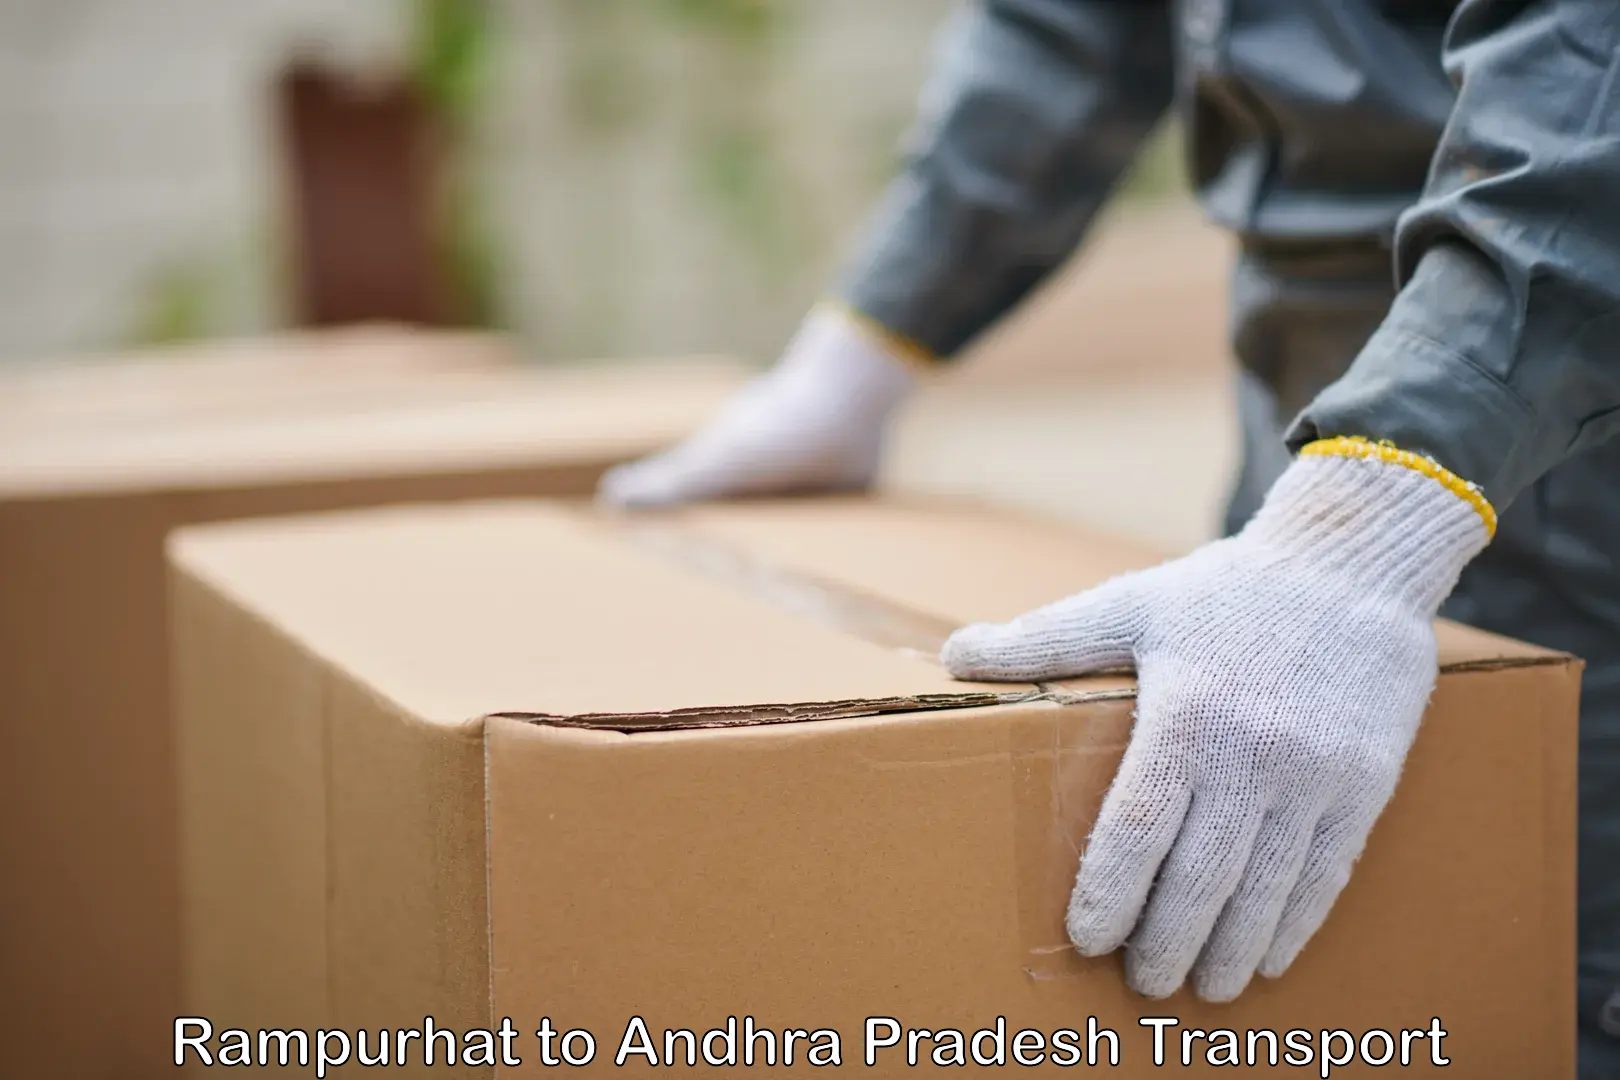 Container transport service in Rampurhat to Buckinghampet